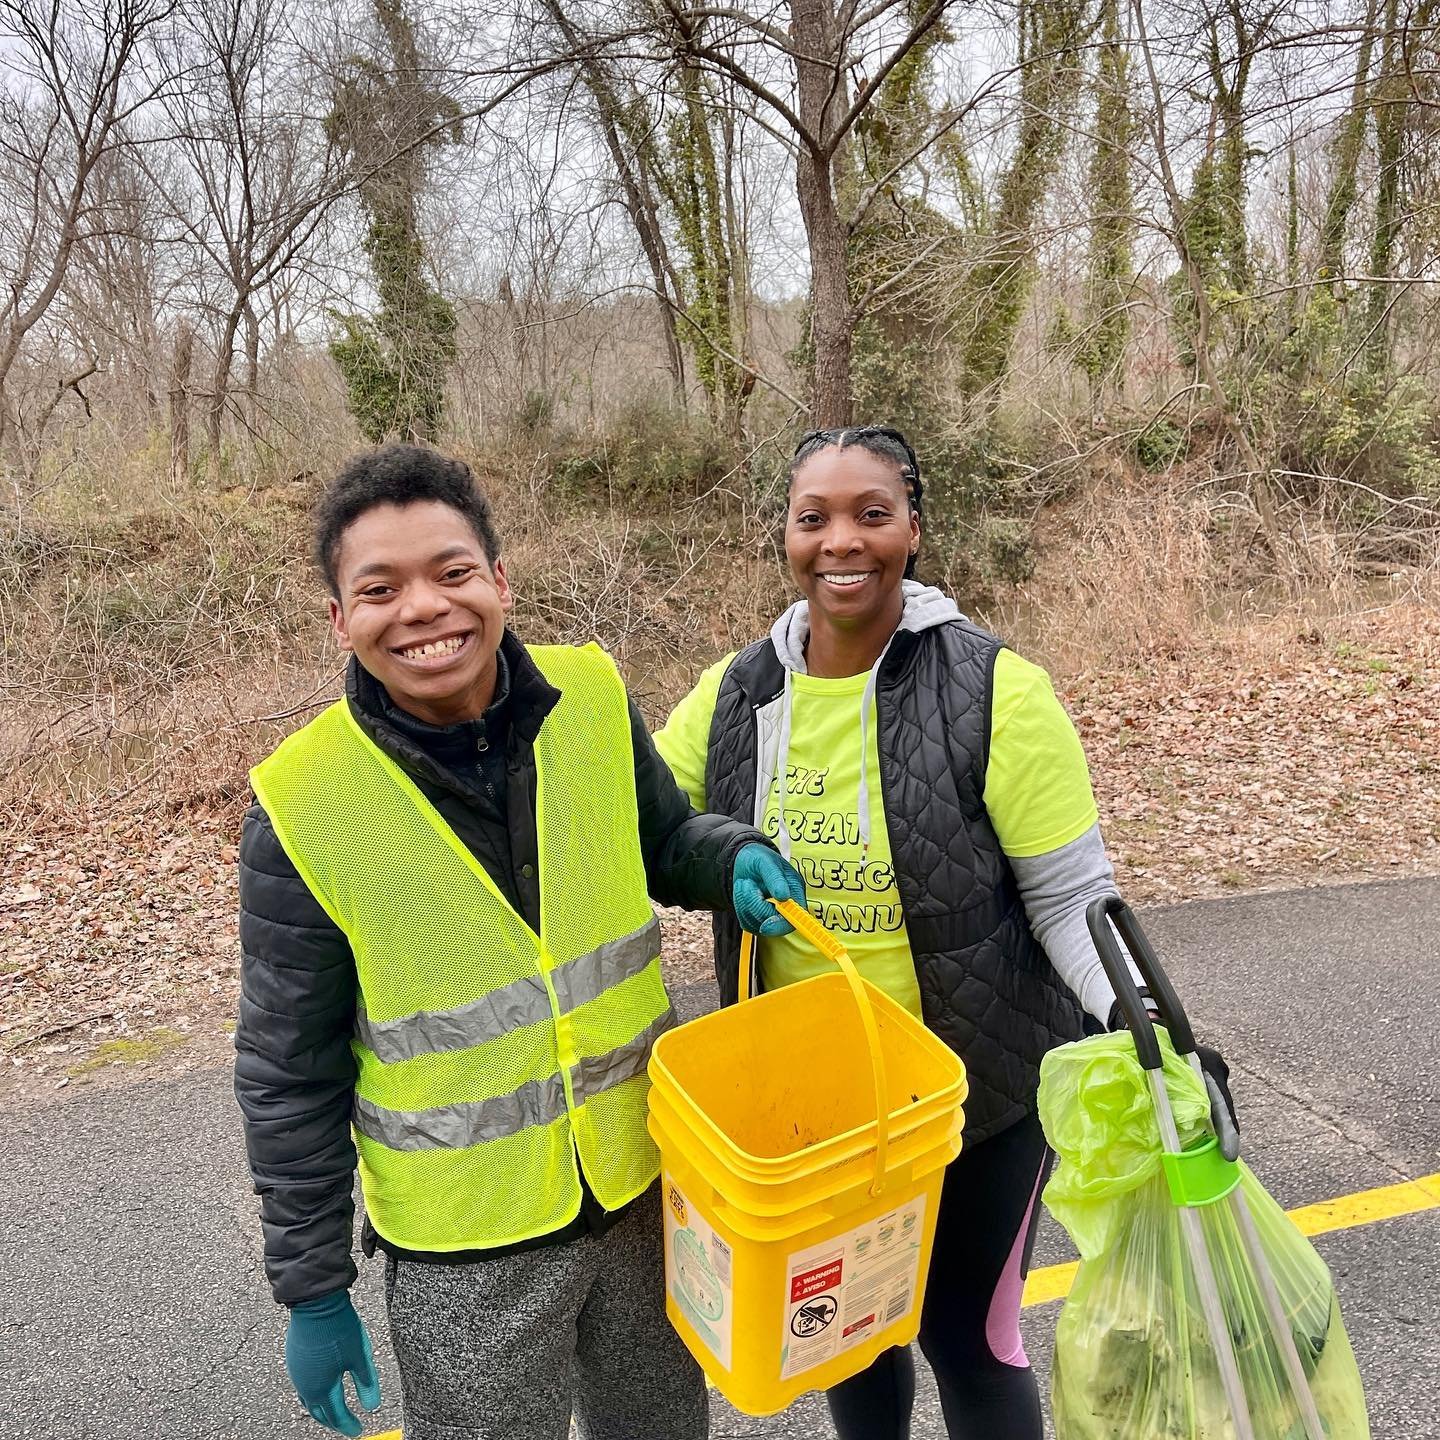 Since day 1, the impact of The Great Raleigh Cleanup has been due to our tremendous volunteers. Volunteers who are willing to give of their time to be of service to others. Who will hop in a creek or climb up a tree to help beautify their communities